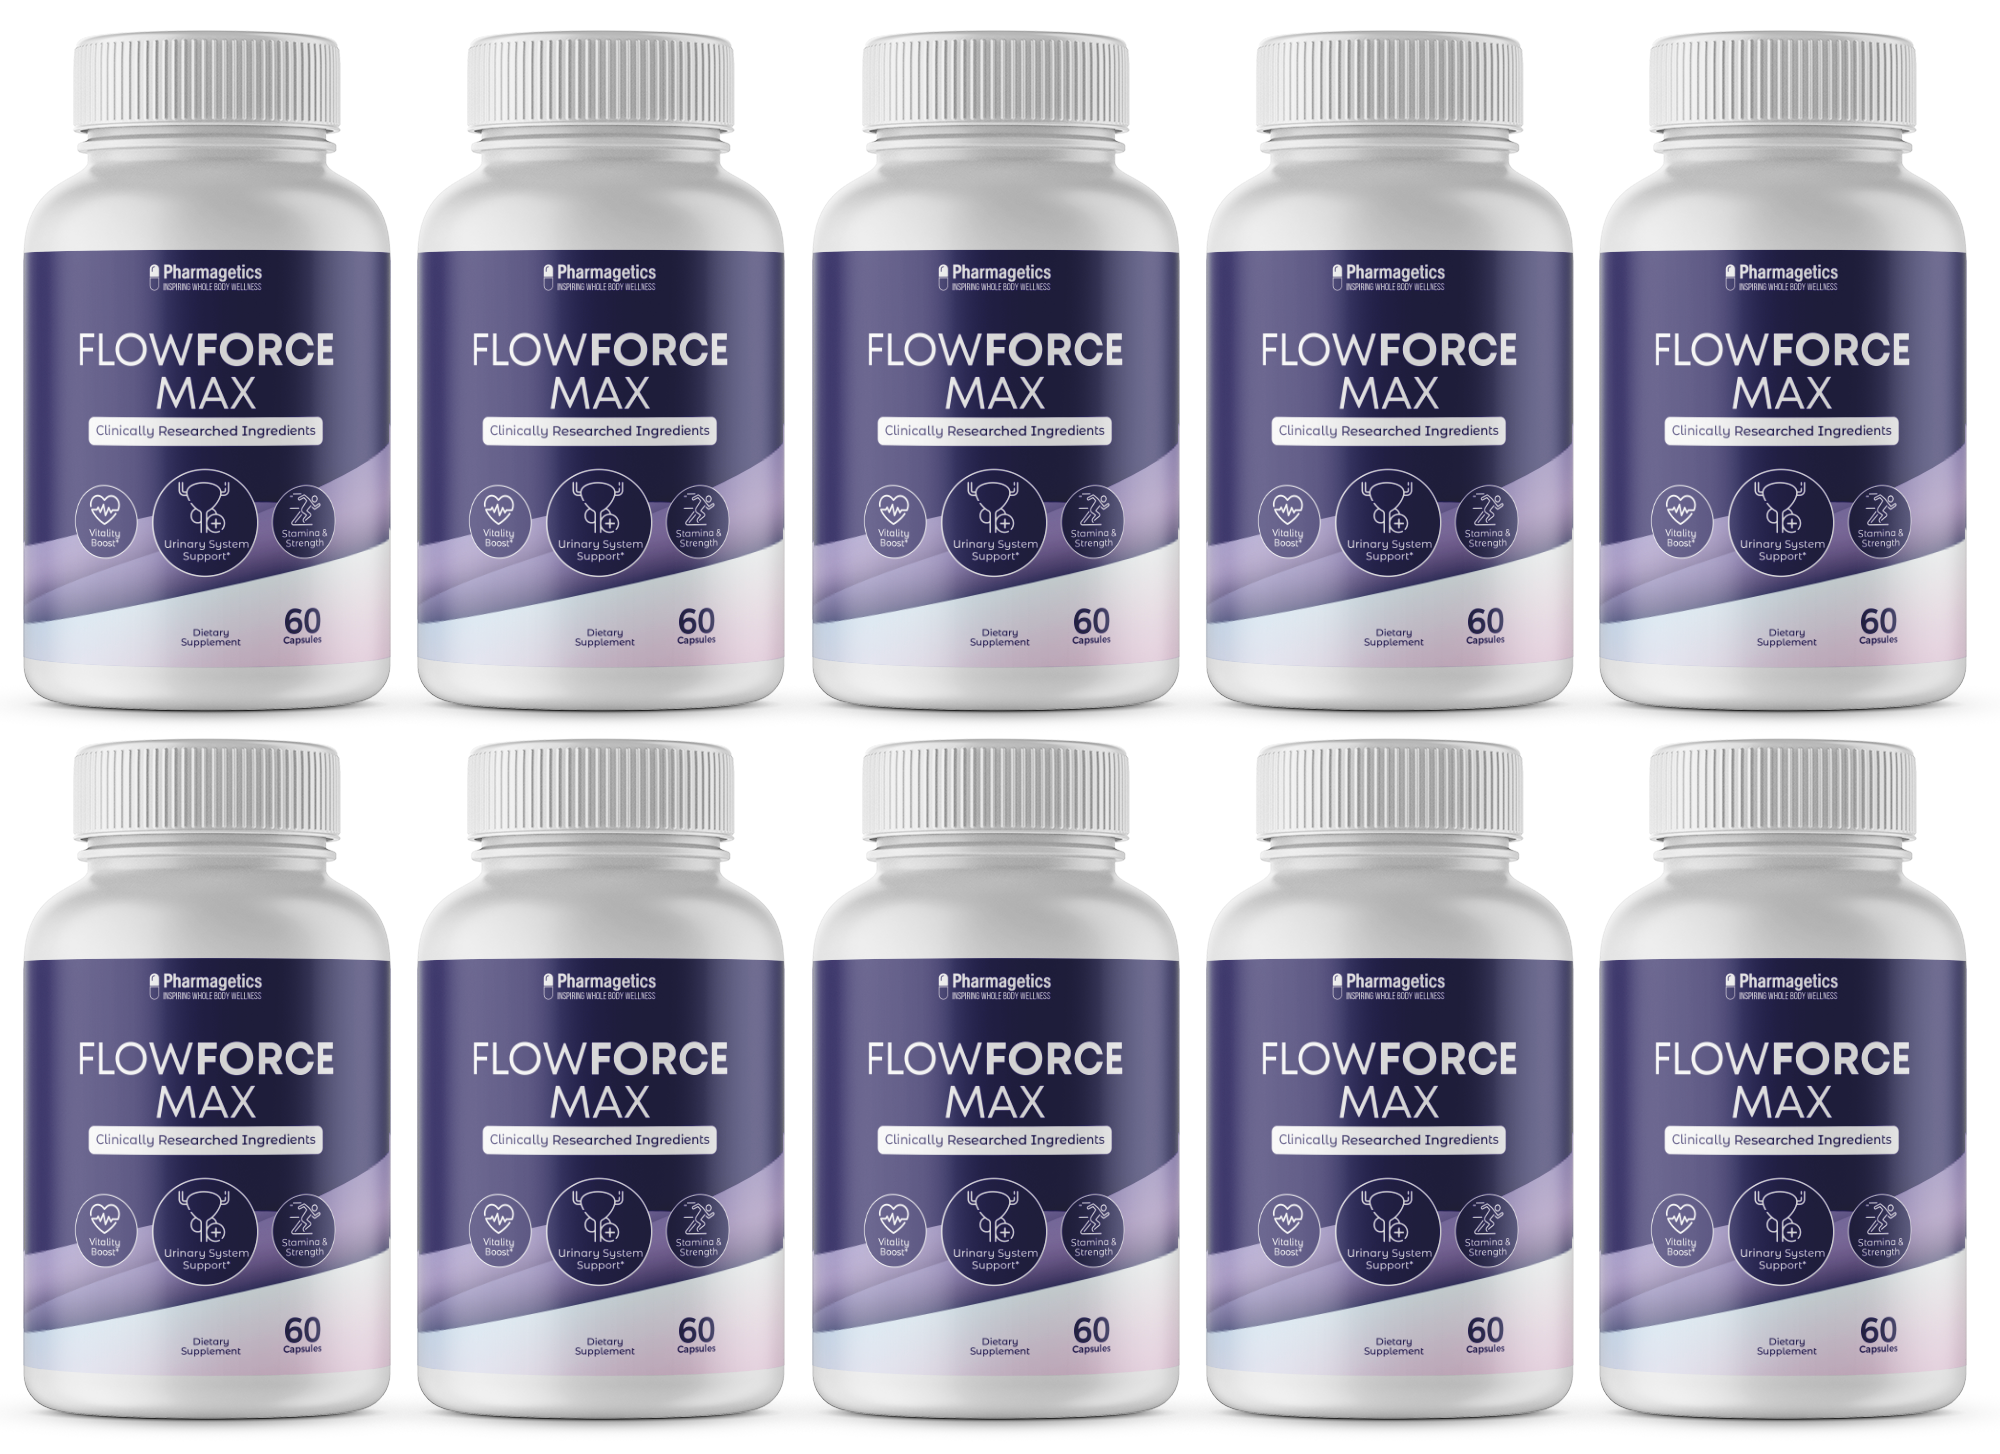 Flowforce Max Prostate Support Supplement Reduce Frequent Urination Flow Force Max - 10 Bottles